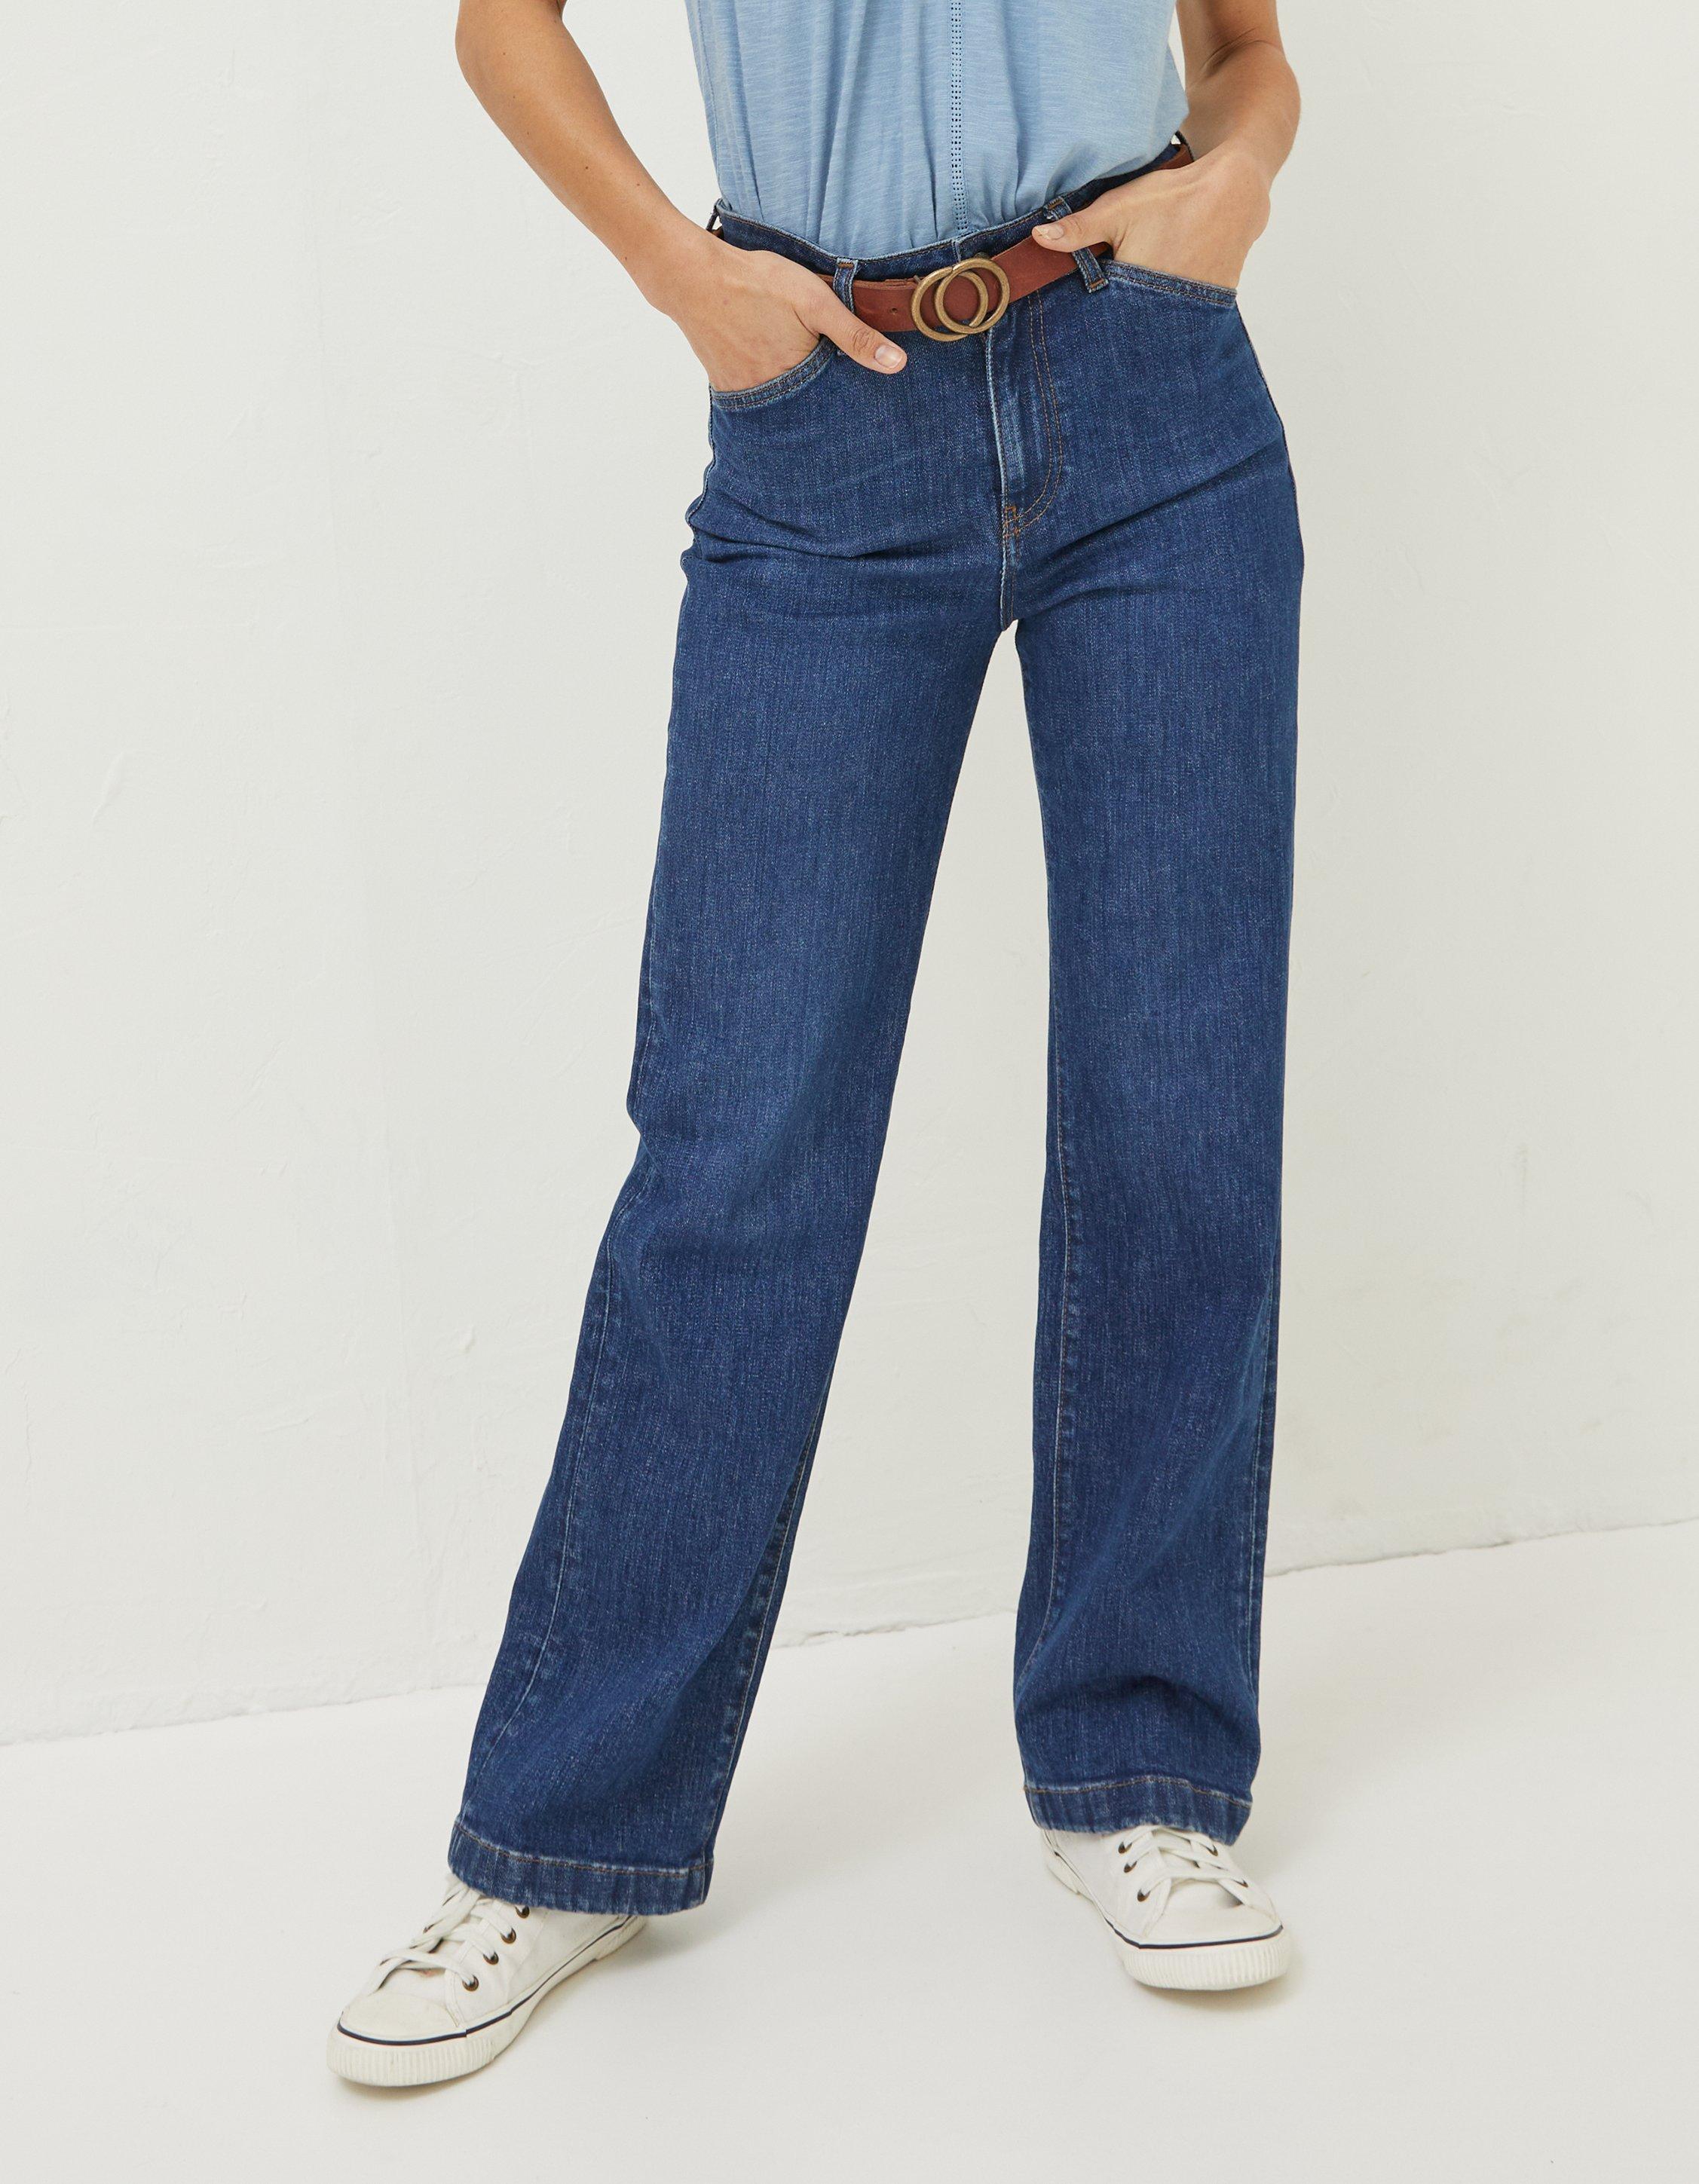 Loose Casual Straight Jeans Women's Pear-shaped Figure All-match Pants  Slightly Fat And Thin Jeans Trousers